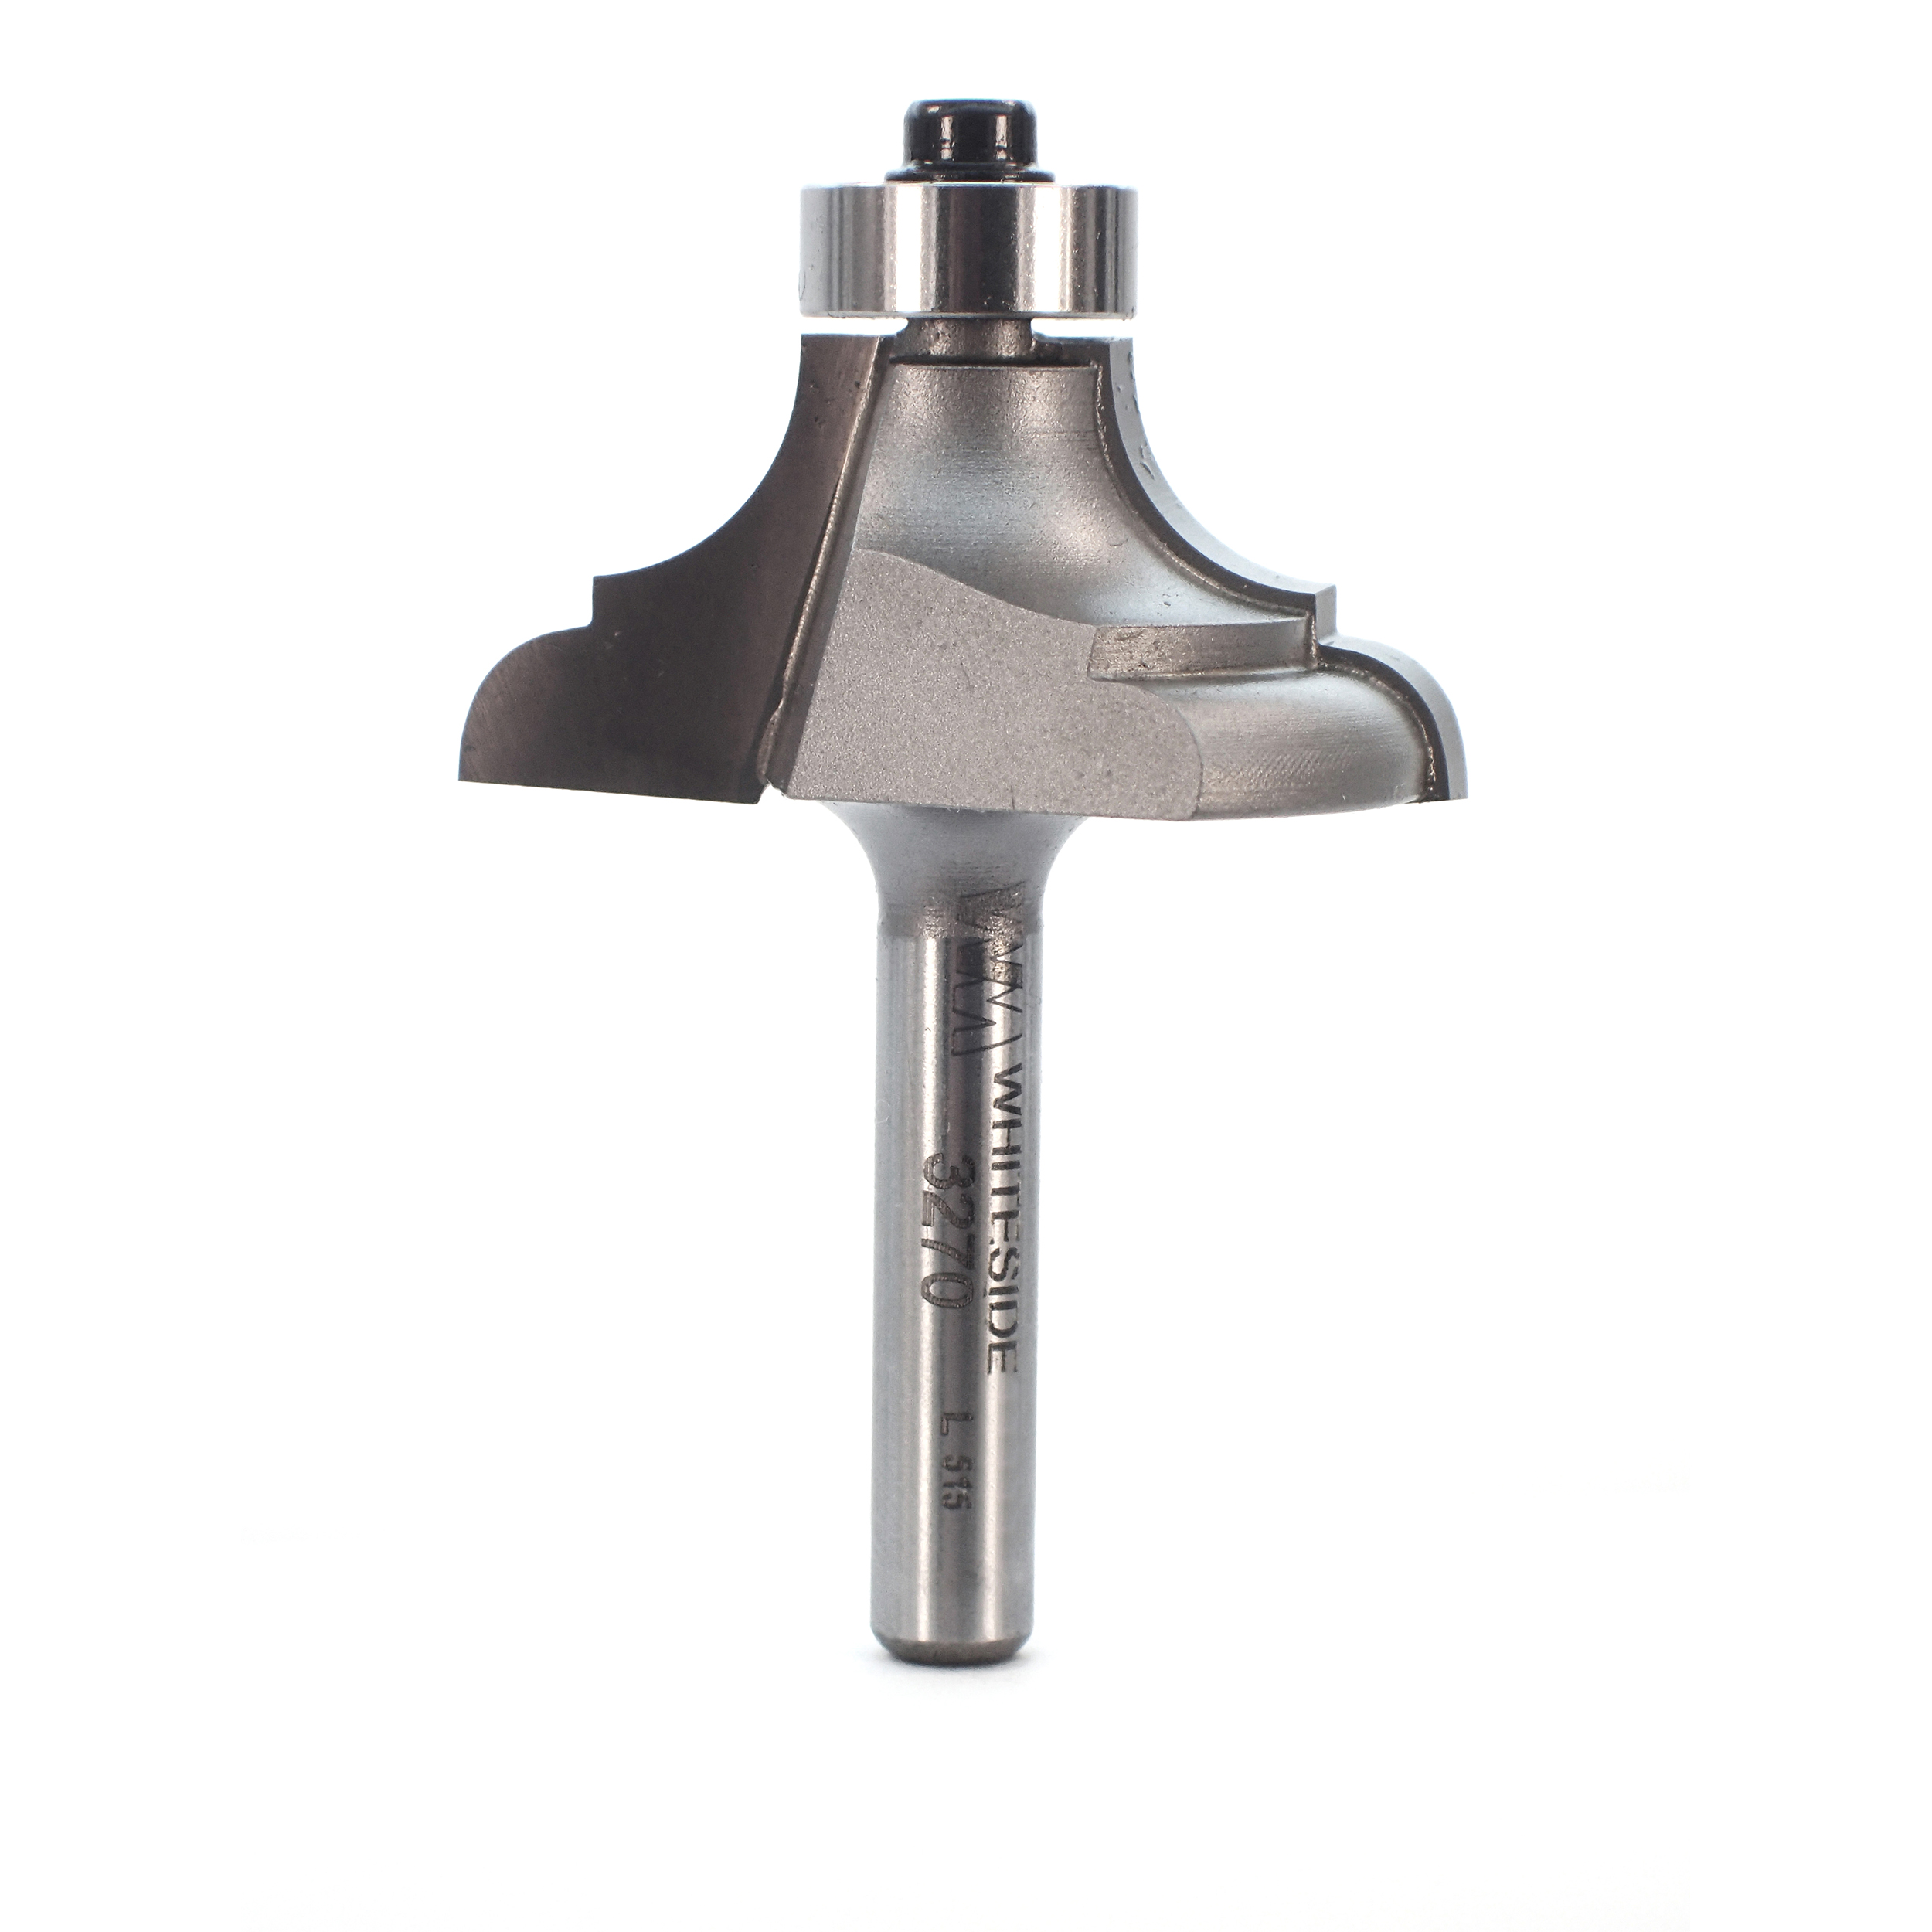 3270 French Traditional Router Bit 1/4" Sh 3/16" R1 X 5/16" R2 1-1/2" D X 5/8" Cl X 2-1/8" Ol